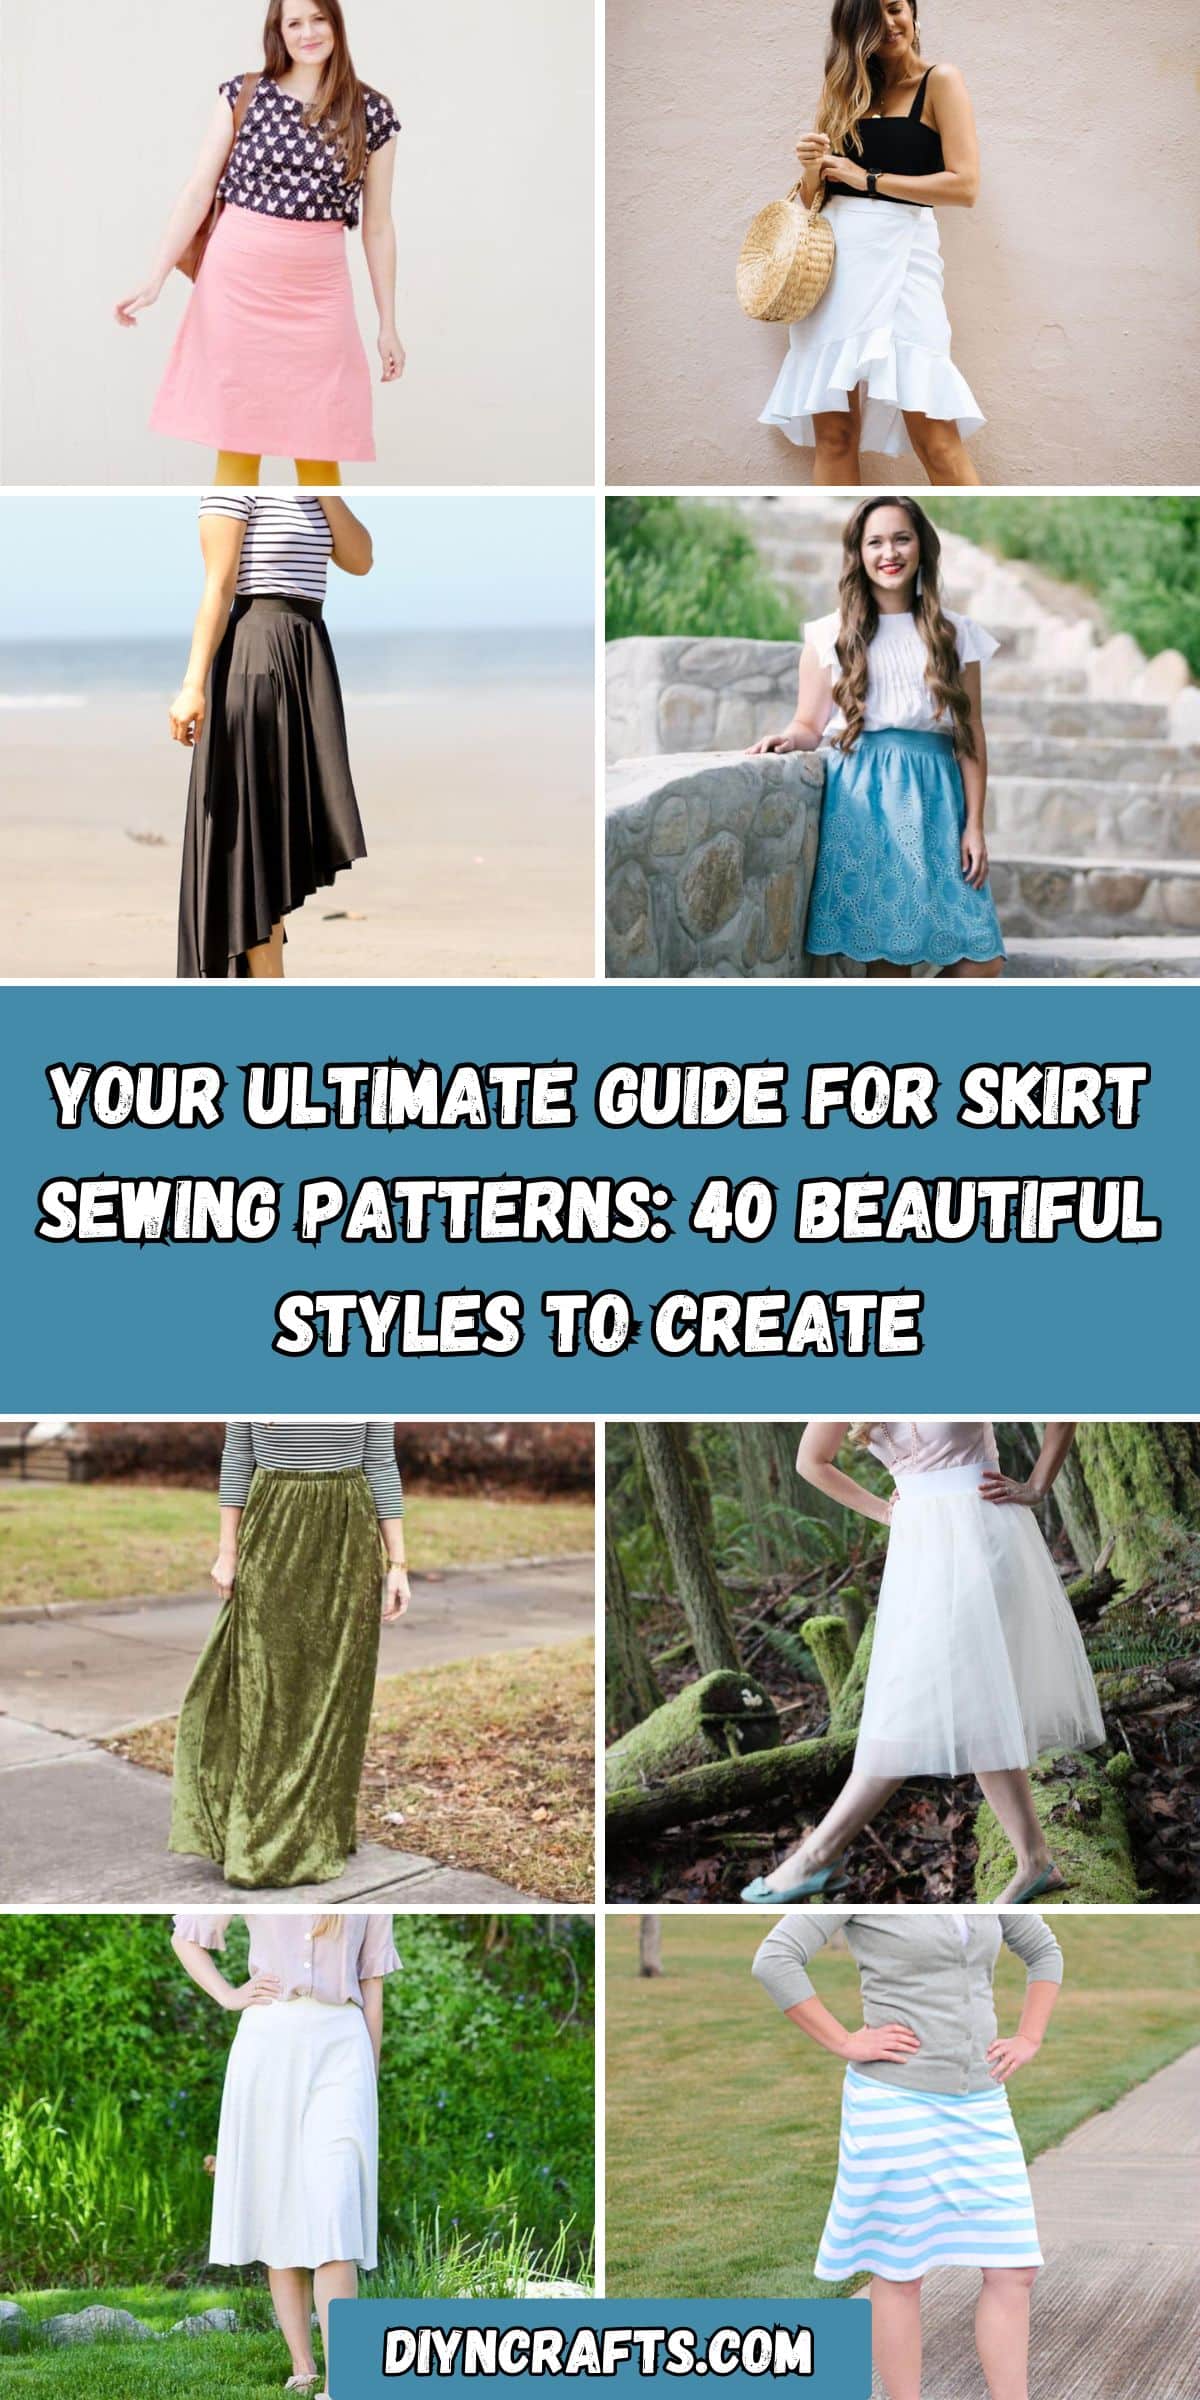 Your Ultimate Guide for Skirt Sewing Patterns: 40 Beautiful Styles to Create collage.